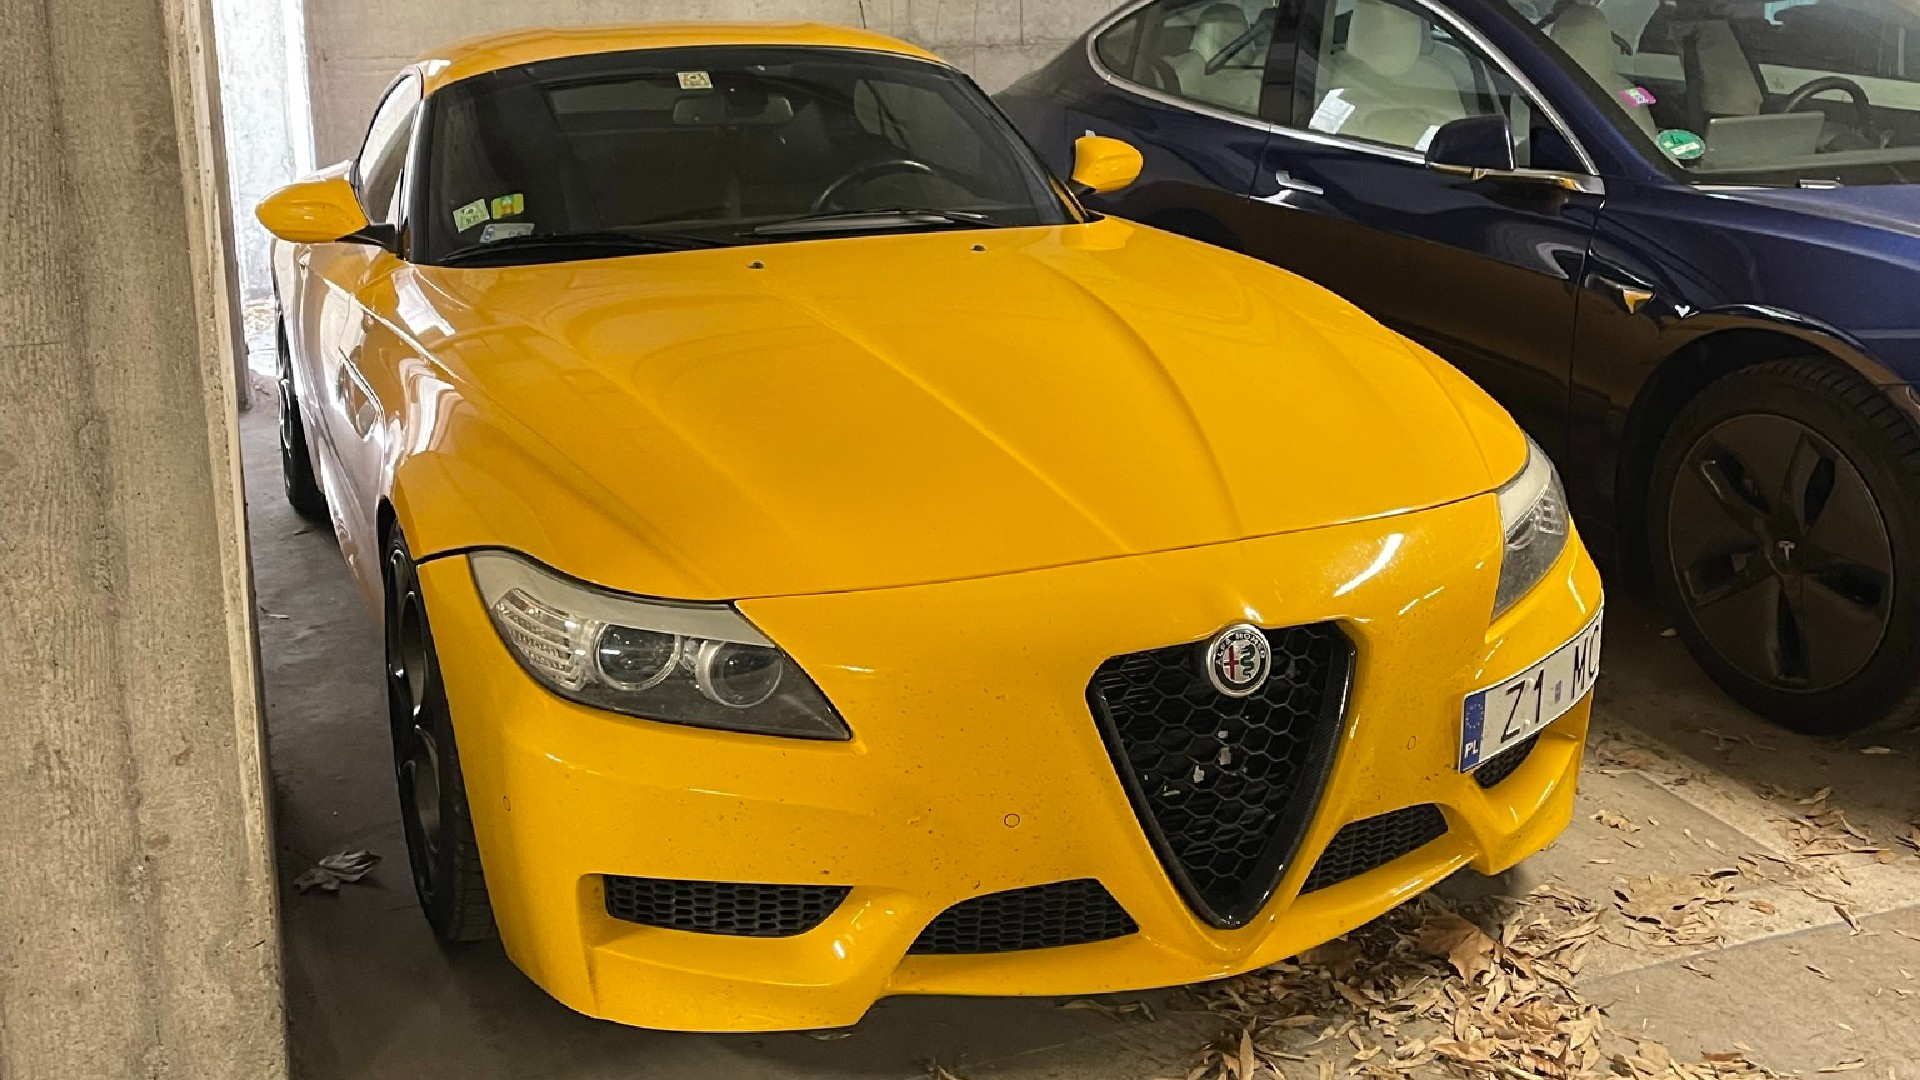 A special BMW Z4 with Alfa Romeo grille and wheels was found hiding in the parking lot of Villa D'Este.